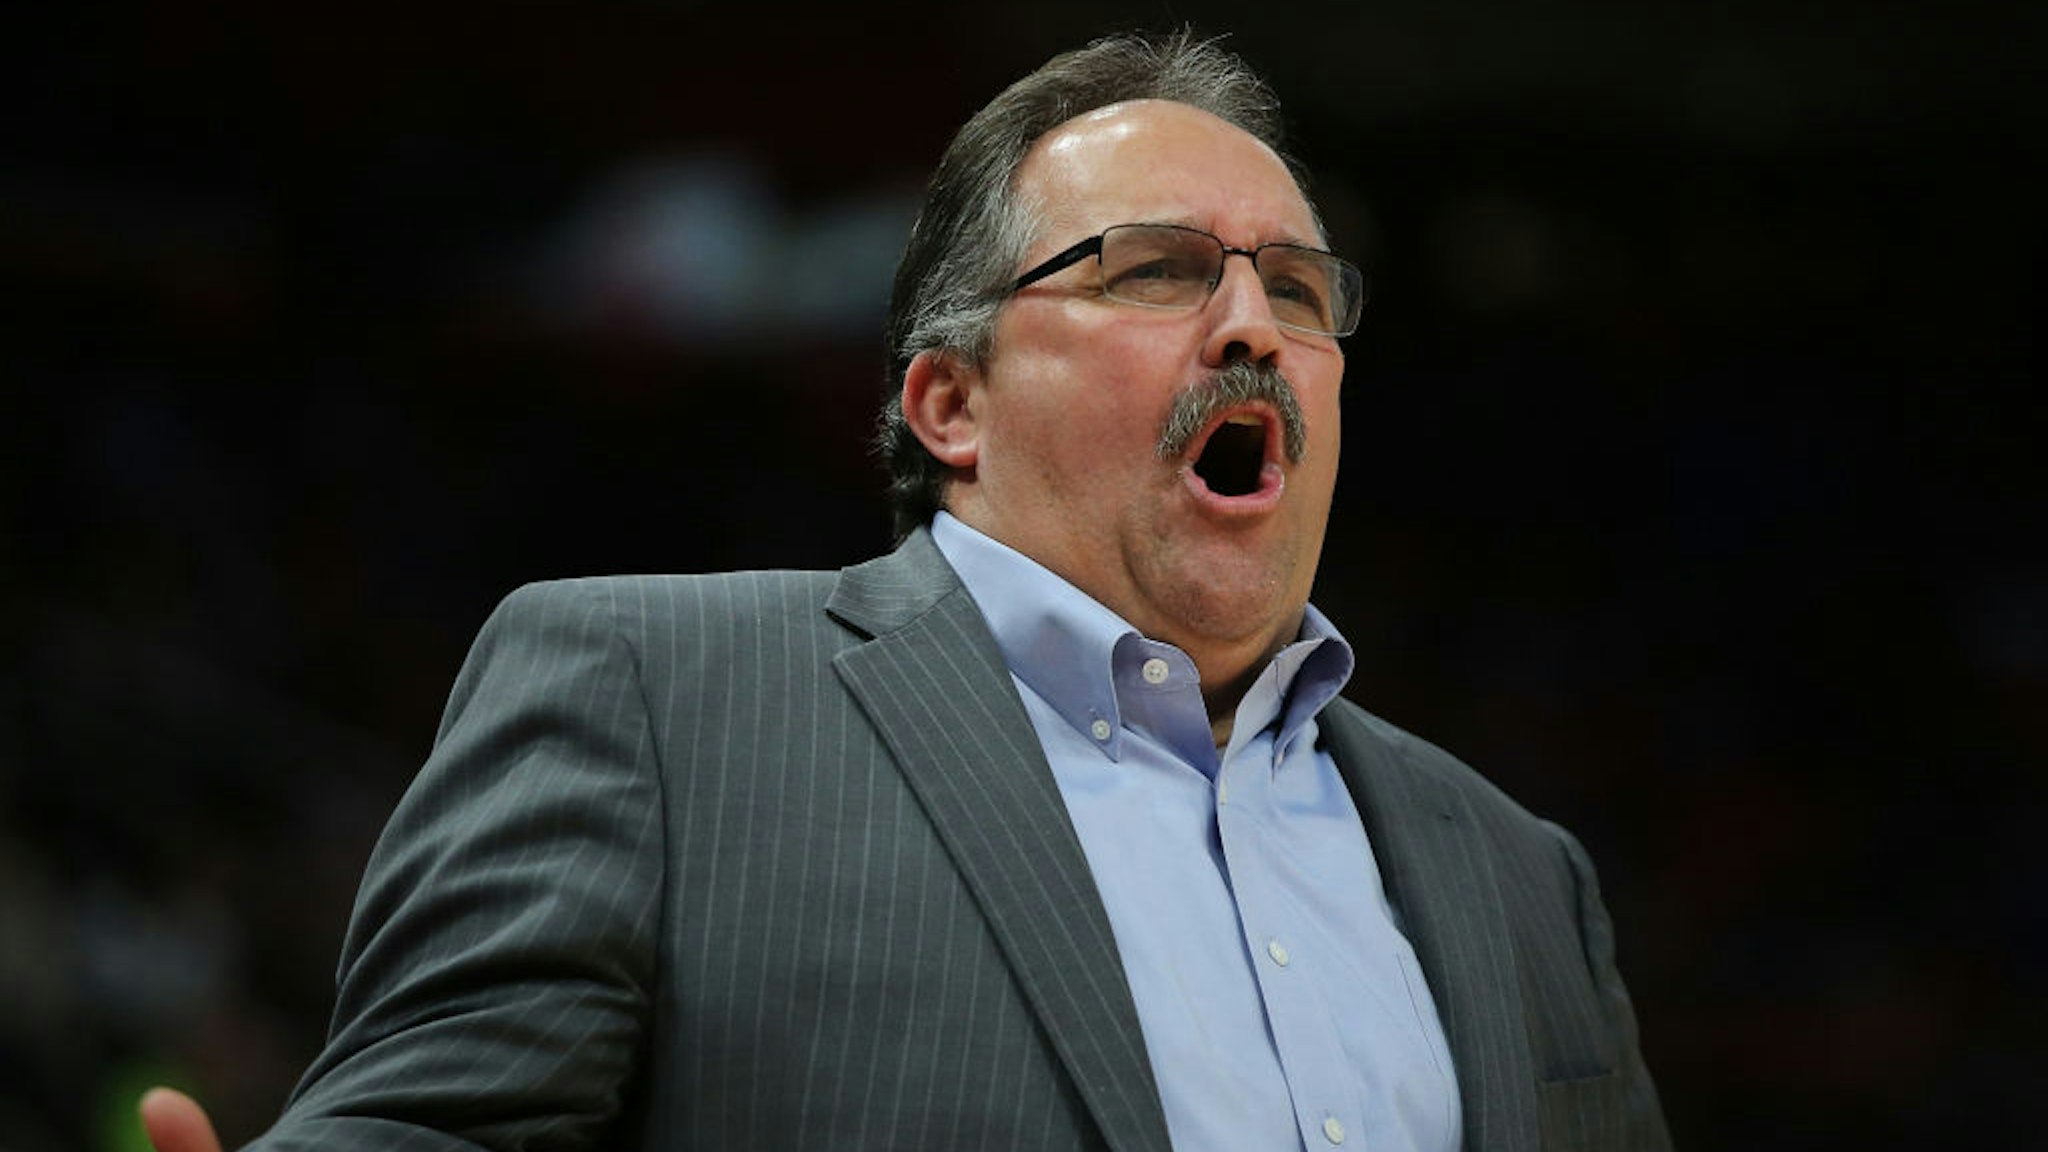 Stan Van Gundy shouts out instructions during the second quarter of the game against the Dallas Mavericks at Little Caesars Arena on April 6, 2018 in Detroit, Michigan.